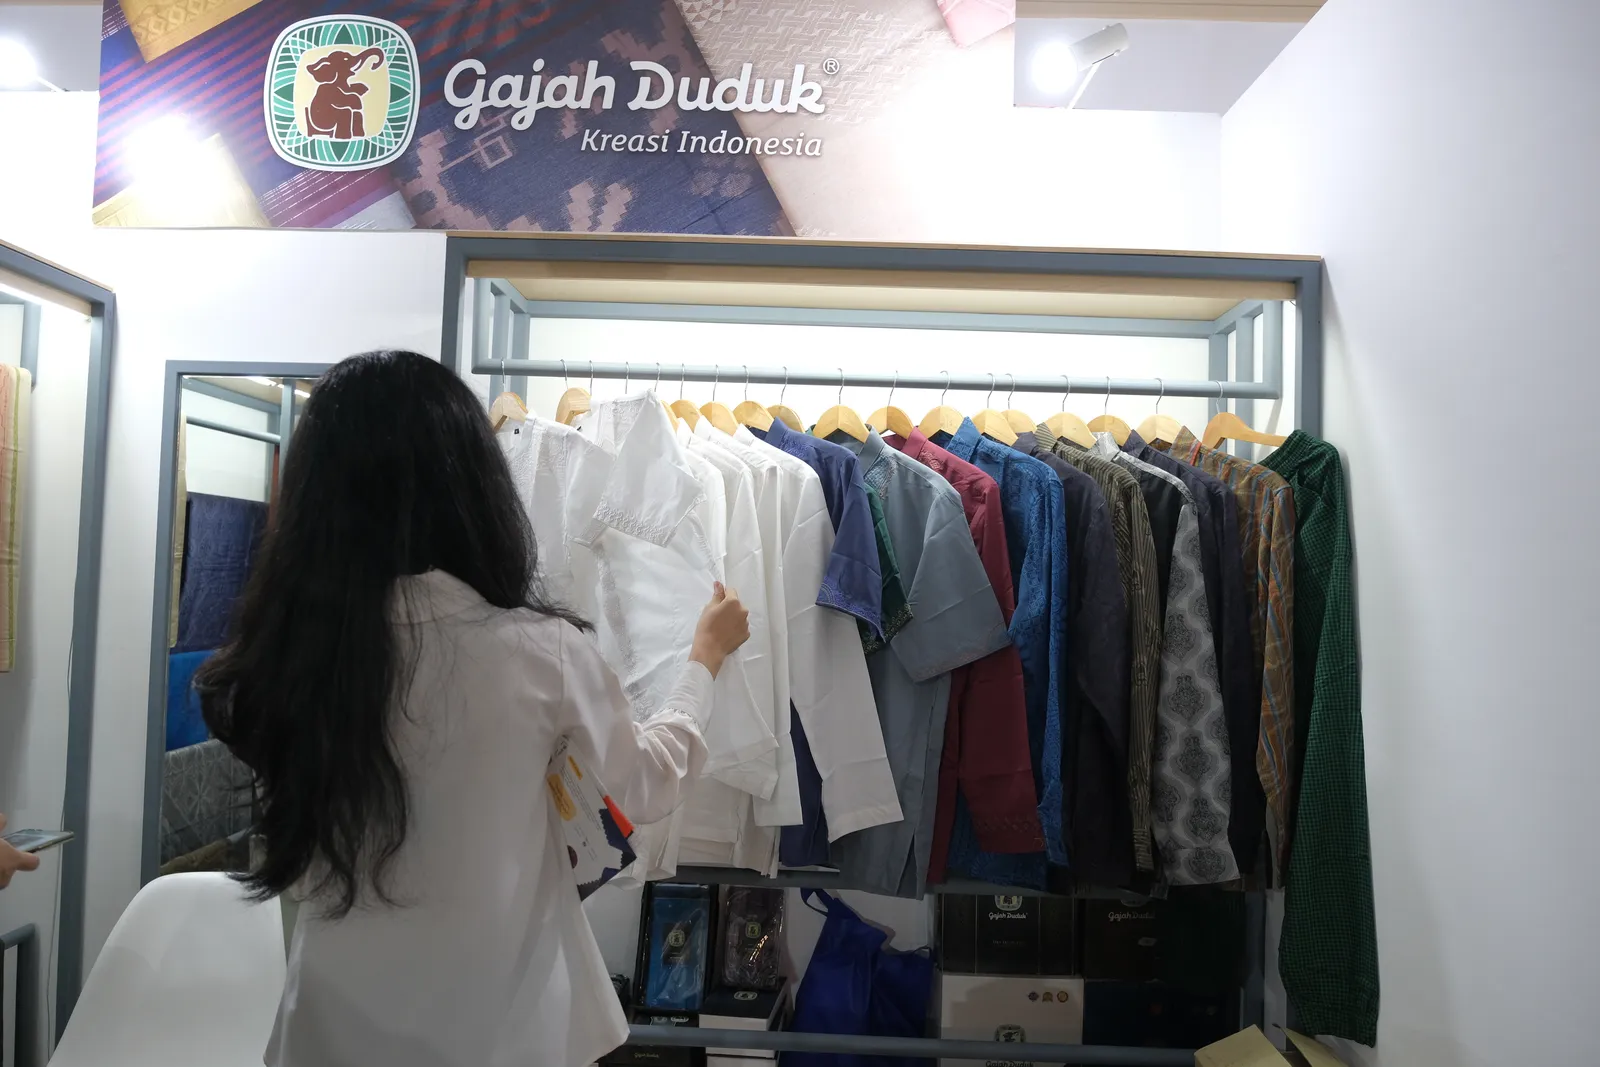 MUFFEST+: APR Gandeng 7 Brand Lokal, Dukung Sustainable Modest Fashion